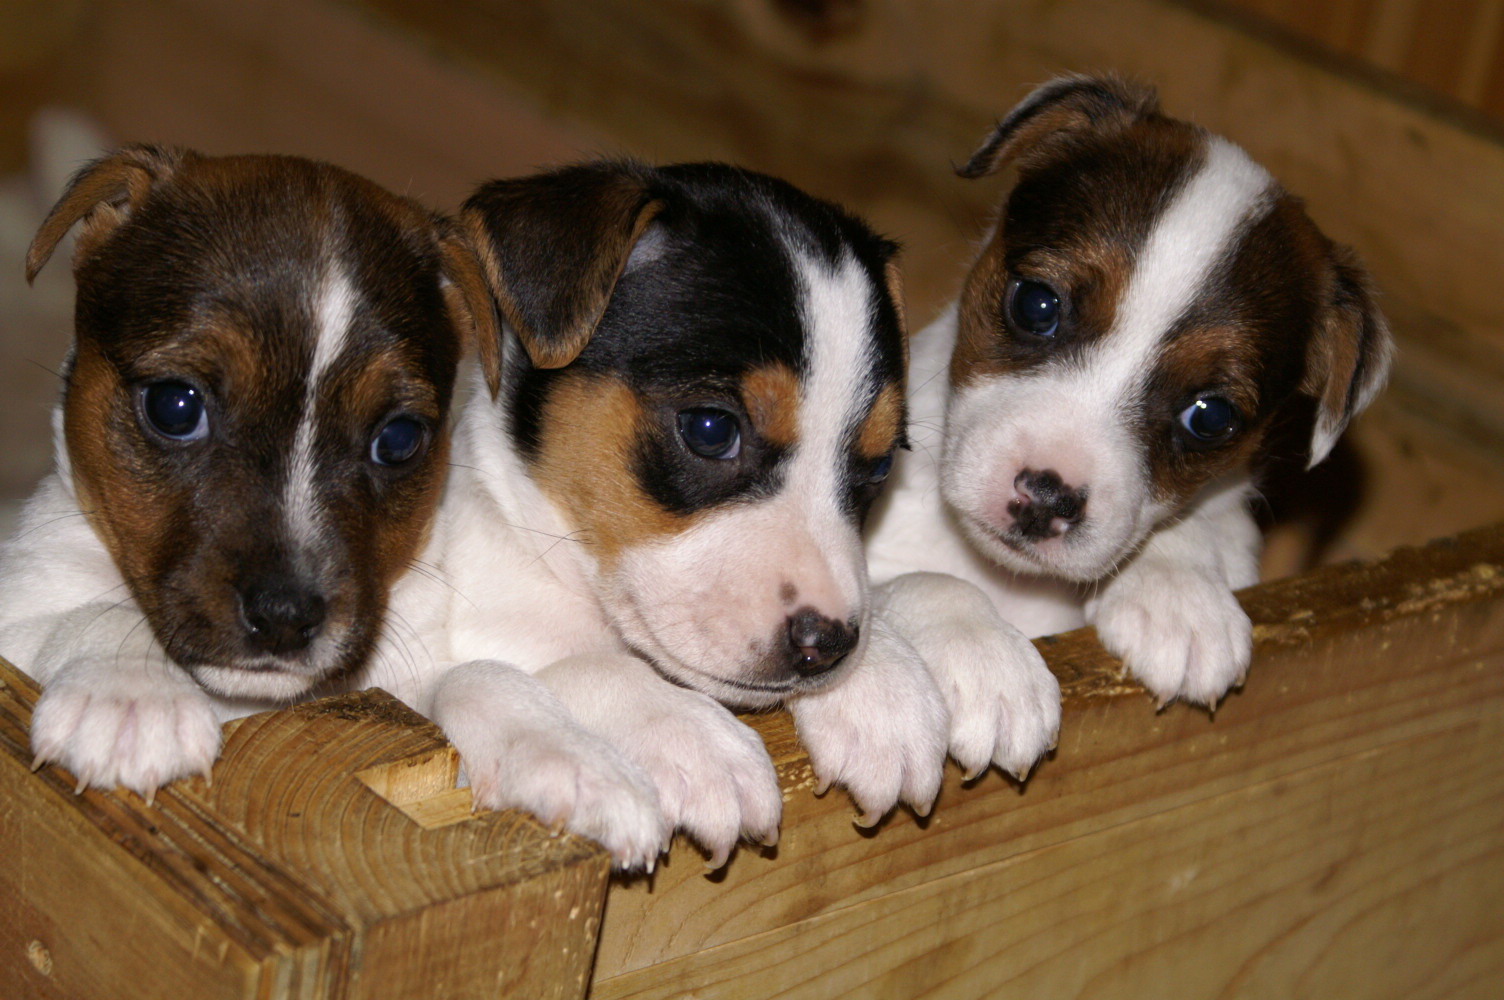 Jack Russell Terrier Puppies: Jack Jack Russell Terrier Puppies Breed